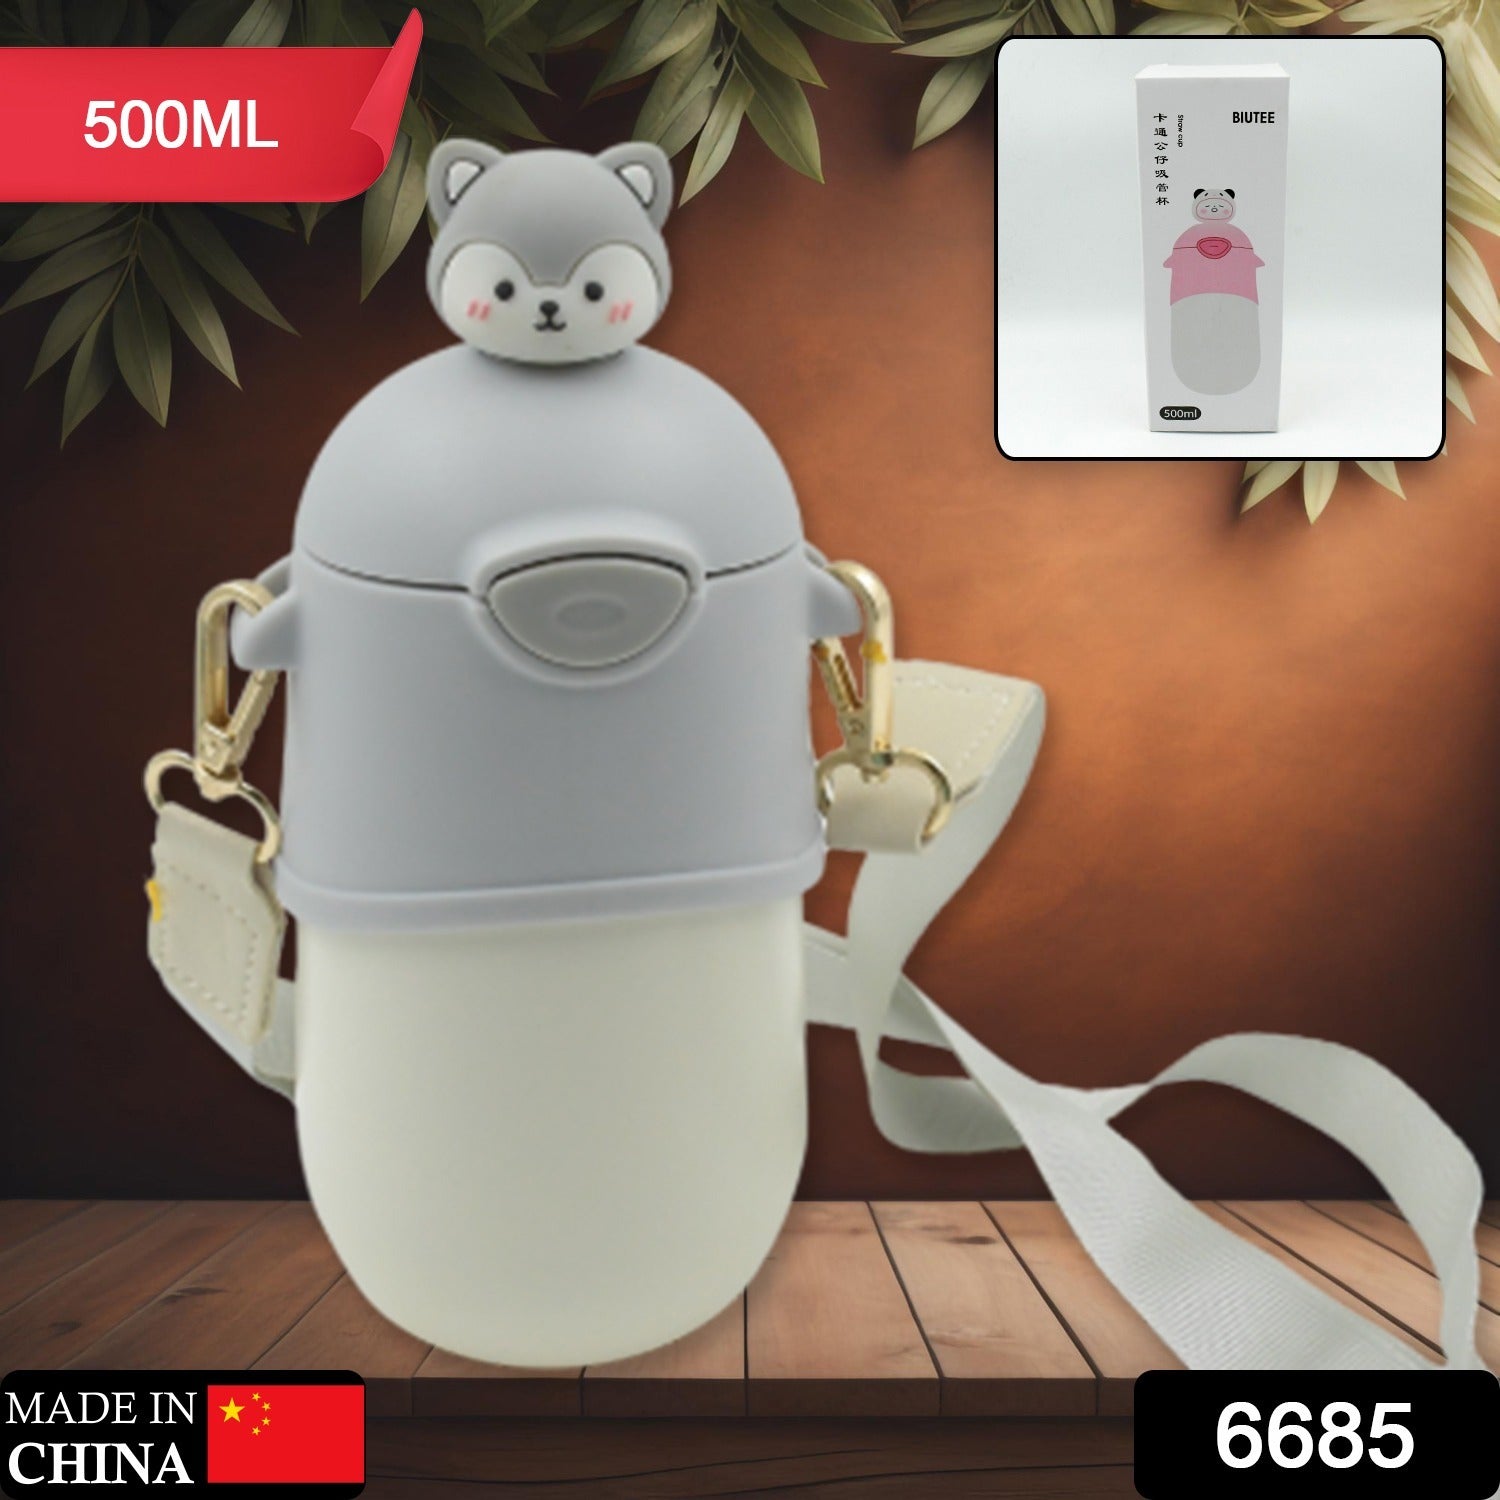 6685 Water Bottle 500ml With Dori and Hook Easy to Carry & Straw Cartoon Vacuum Flask Thermal Stainless Steel Portable Sealed Bear Water Bottle for Gifts Water Bottle for Gifts for Outdoor/ Office/Gym/School (500 MlL)